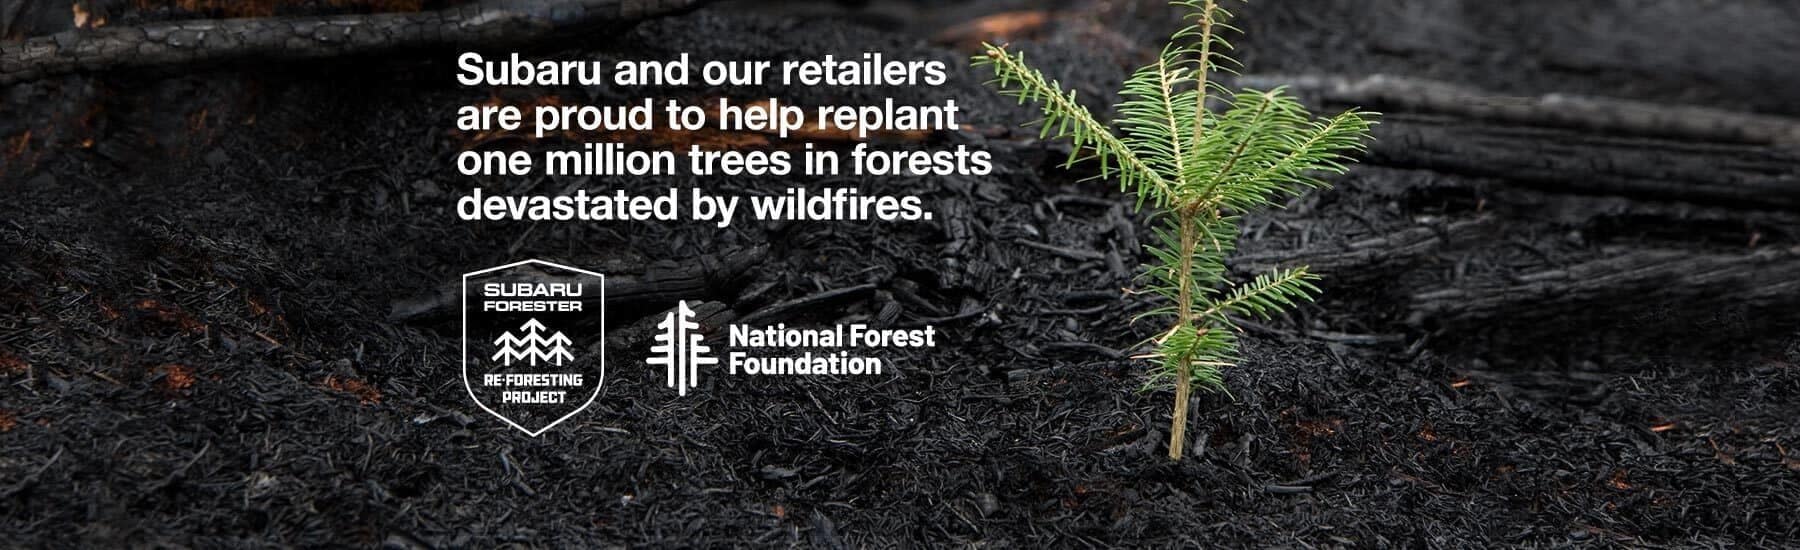 Subaru and our retailers are proud to replant one million trees in forests devastated by wildfires.